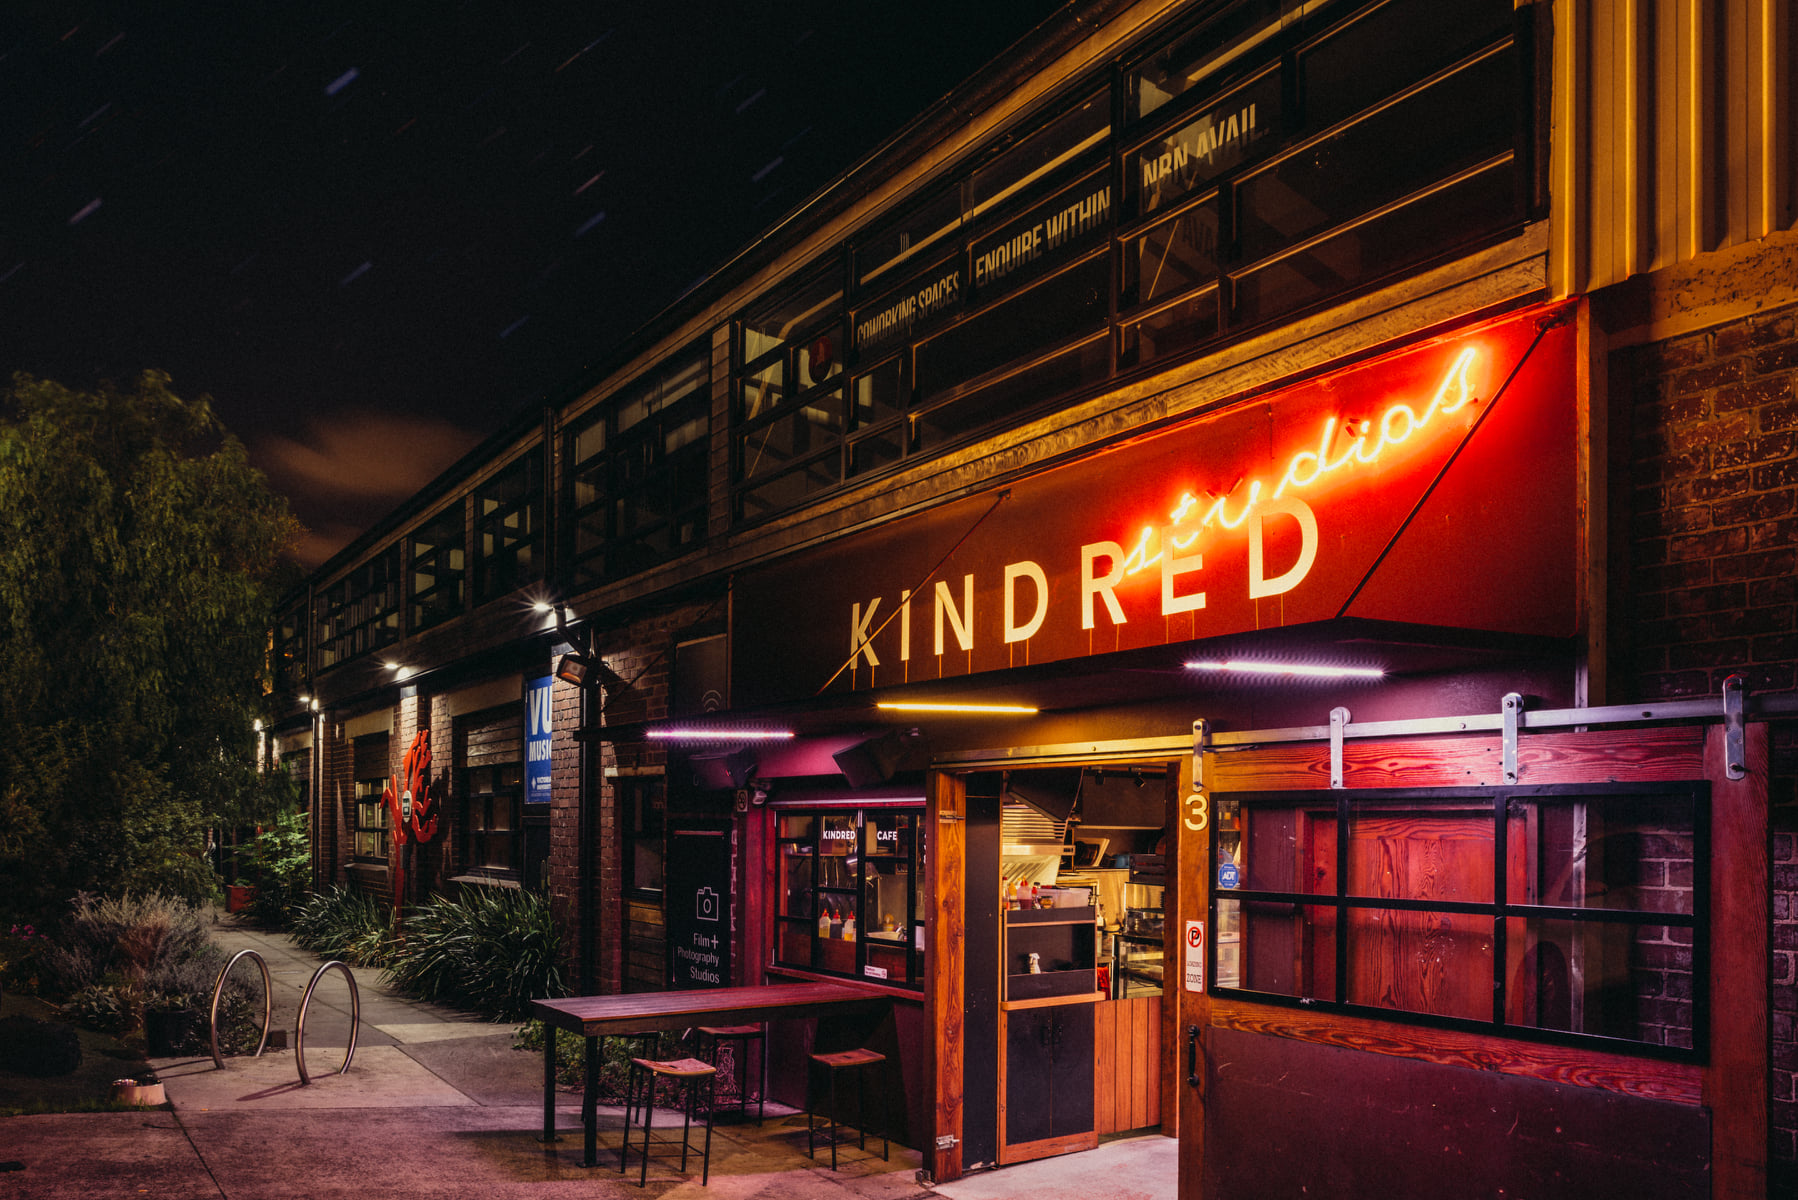 Kindred Studios, home to the Exude Office